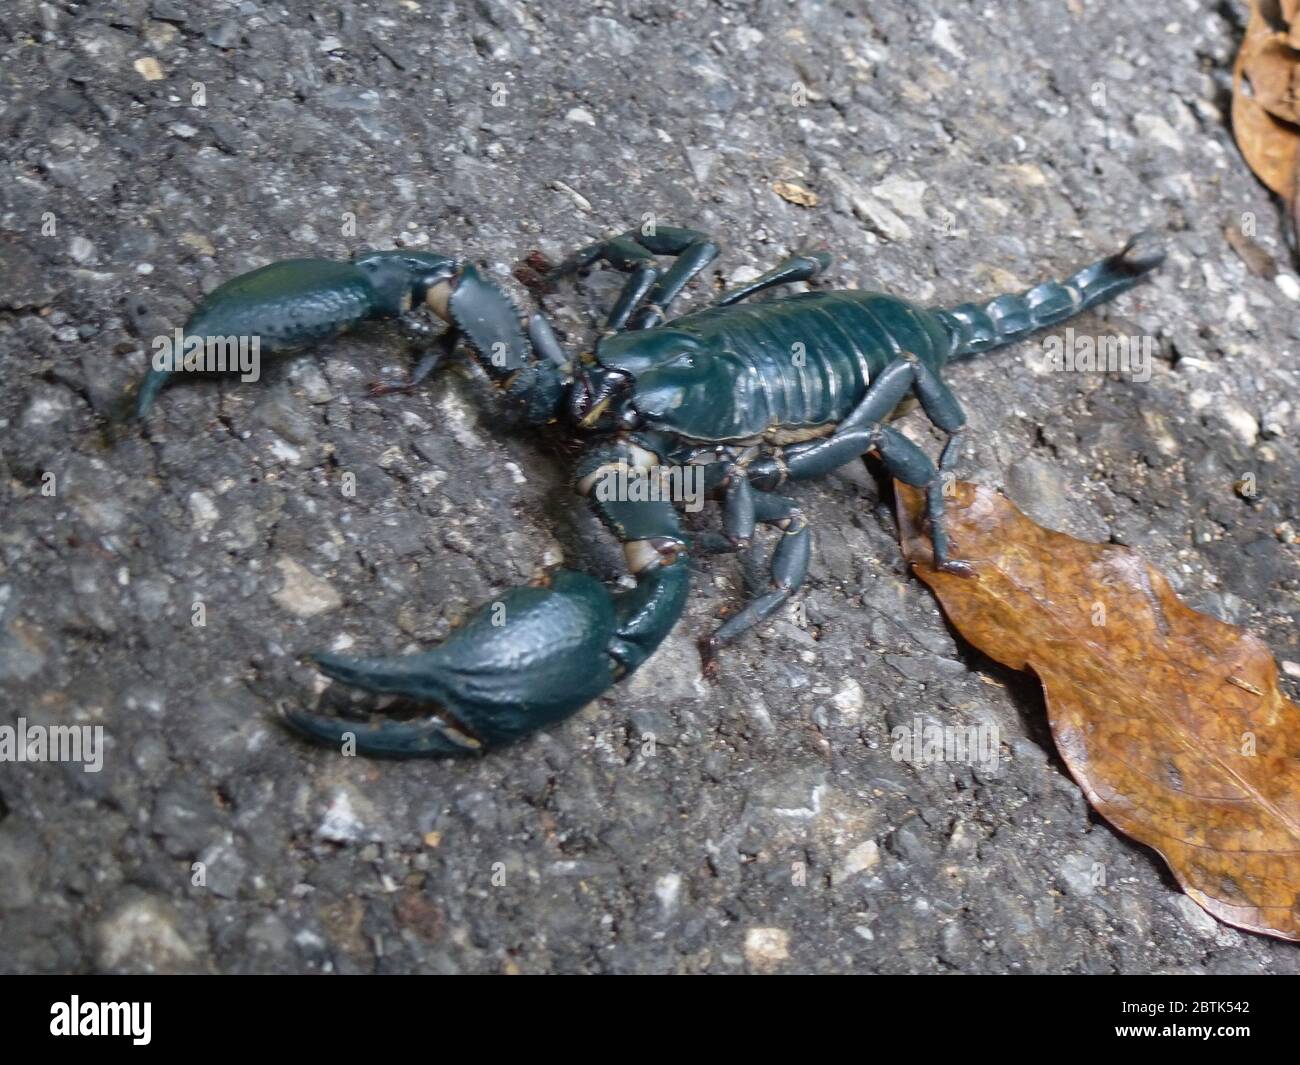 Huge blue scorpion in a forest in Thailand Stock Photo